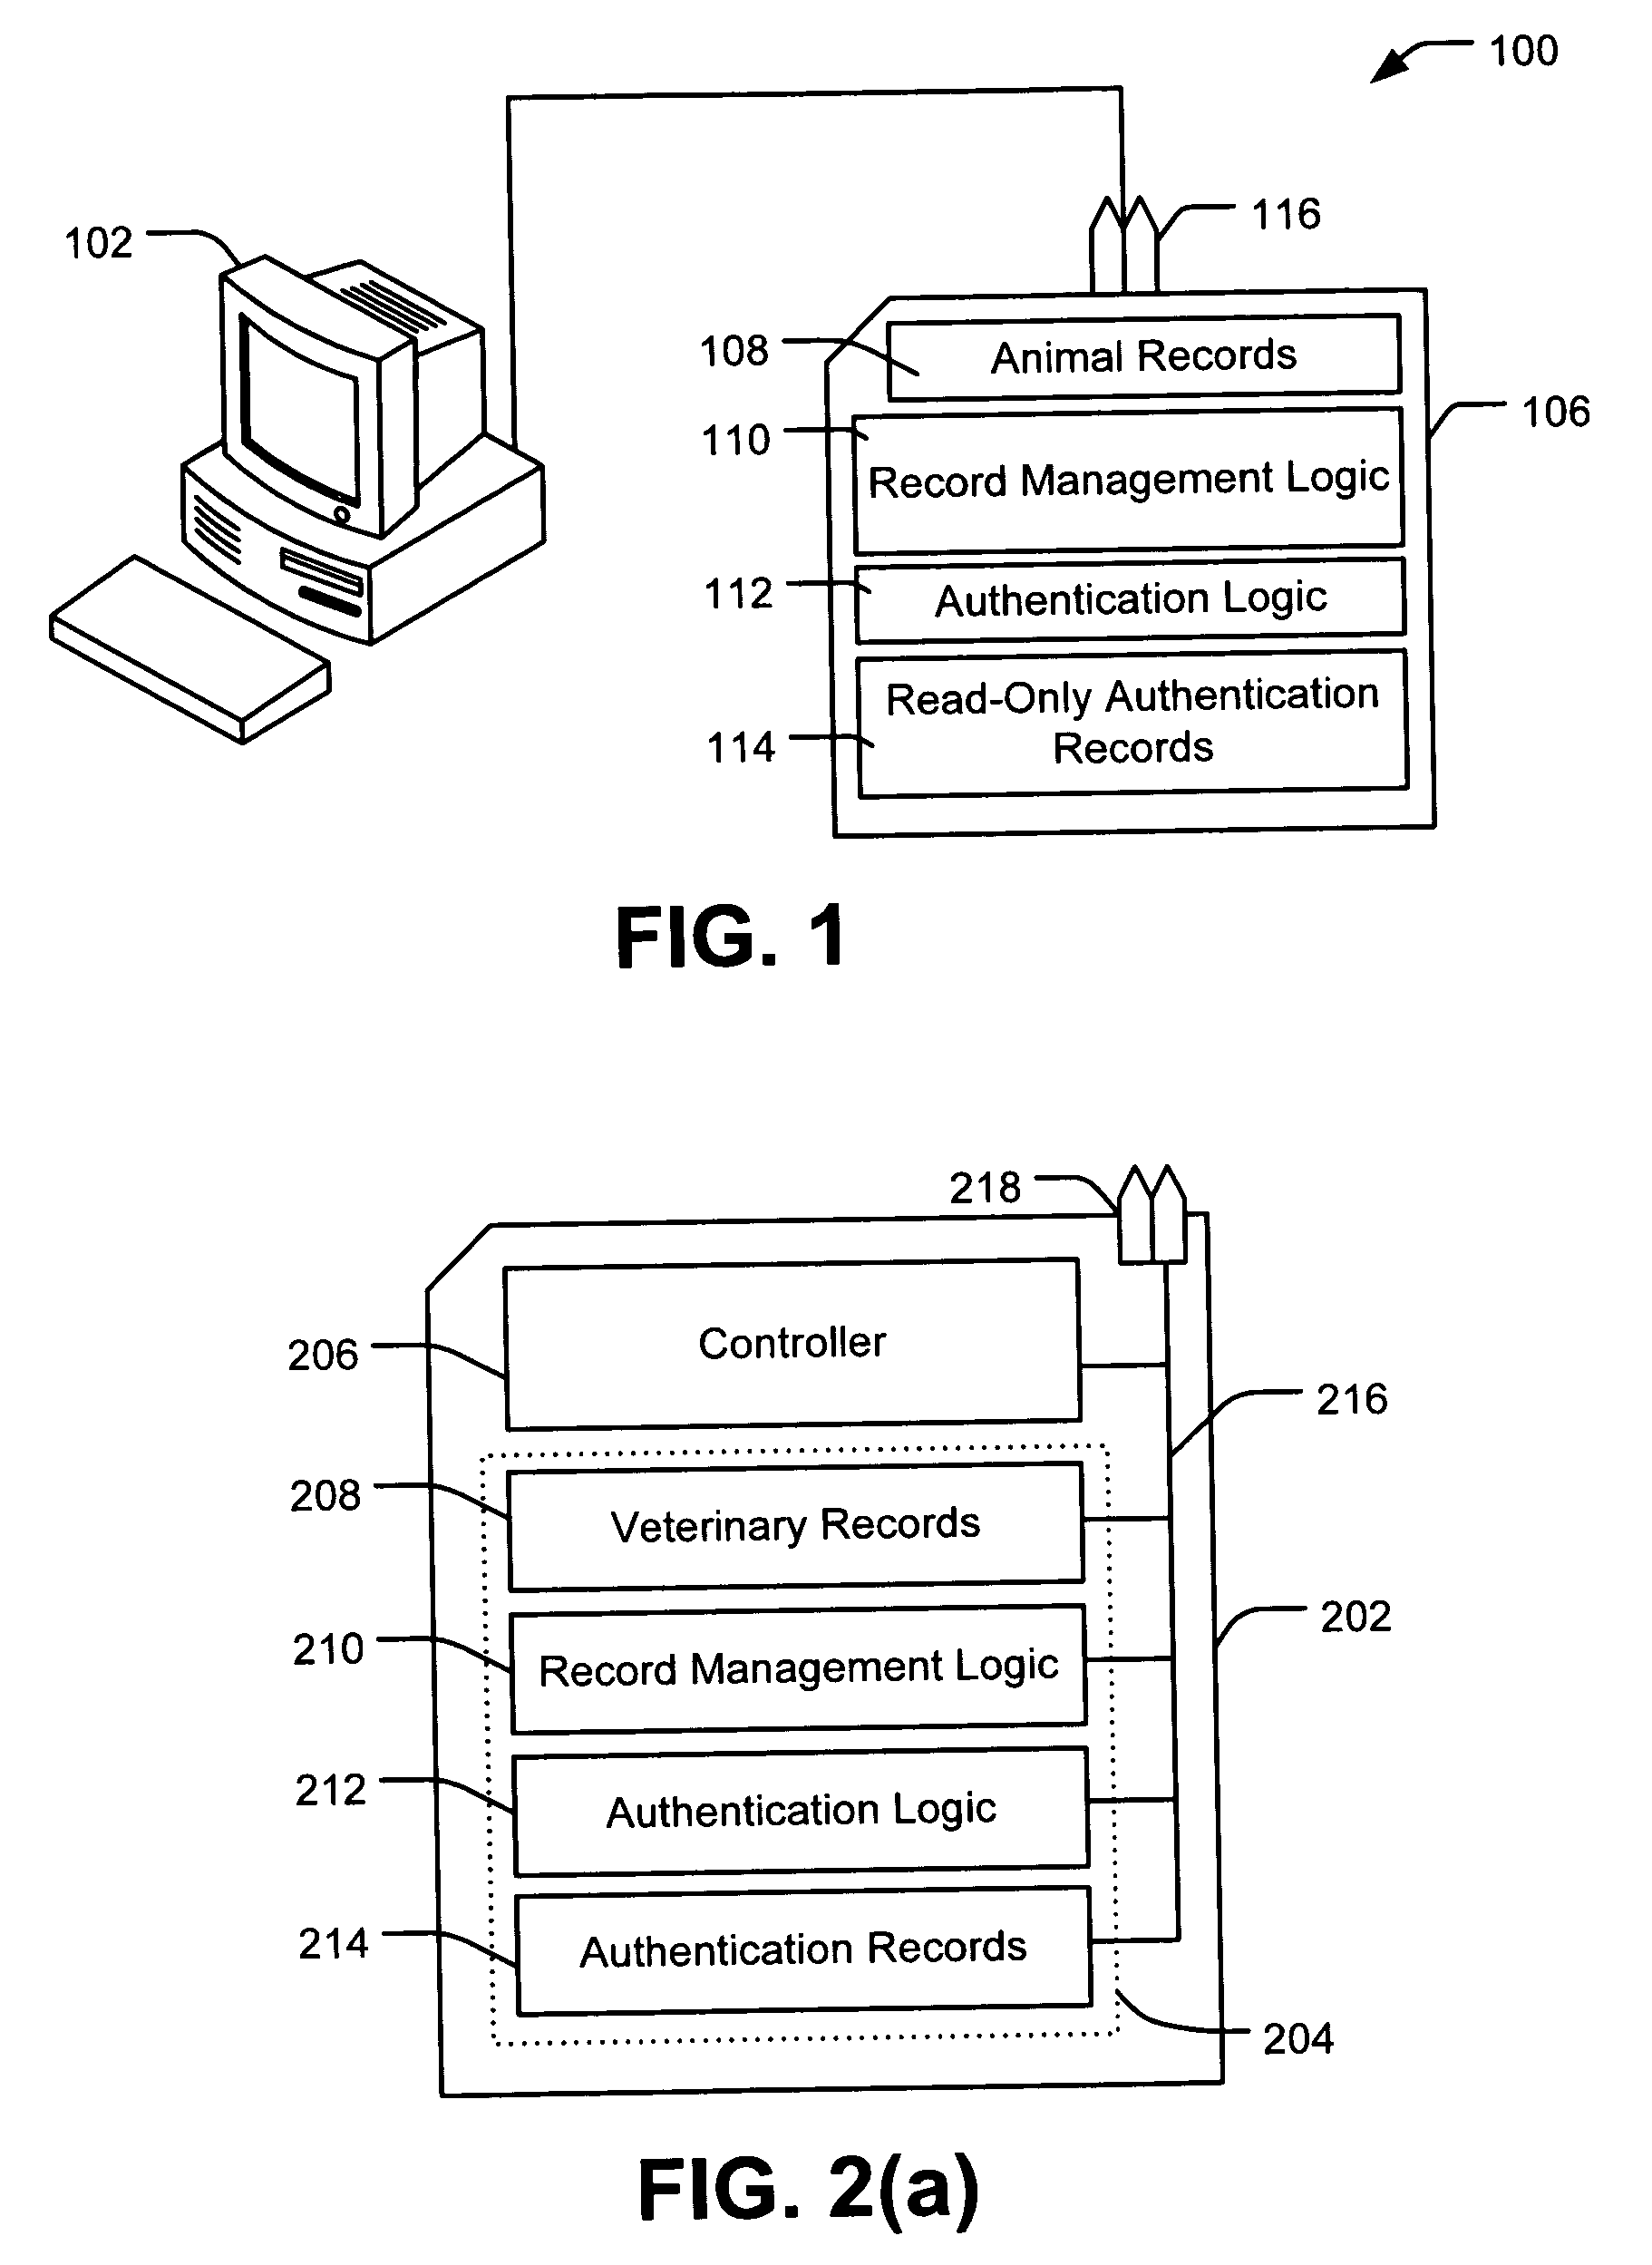 Portable veterinary medical record apparatus and method of use